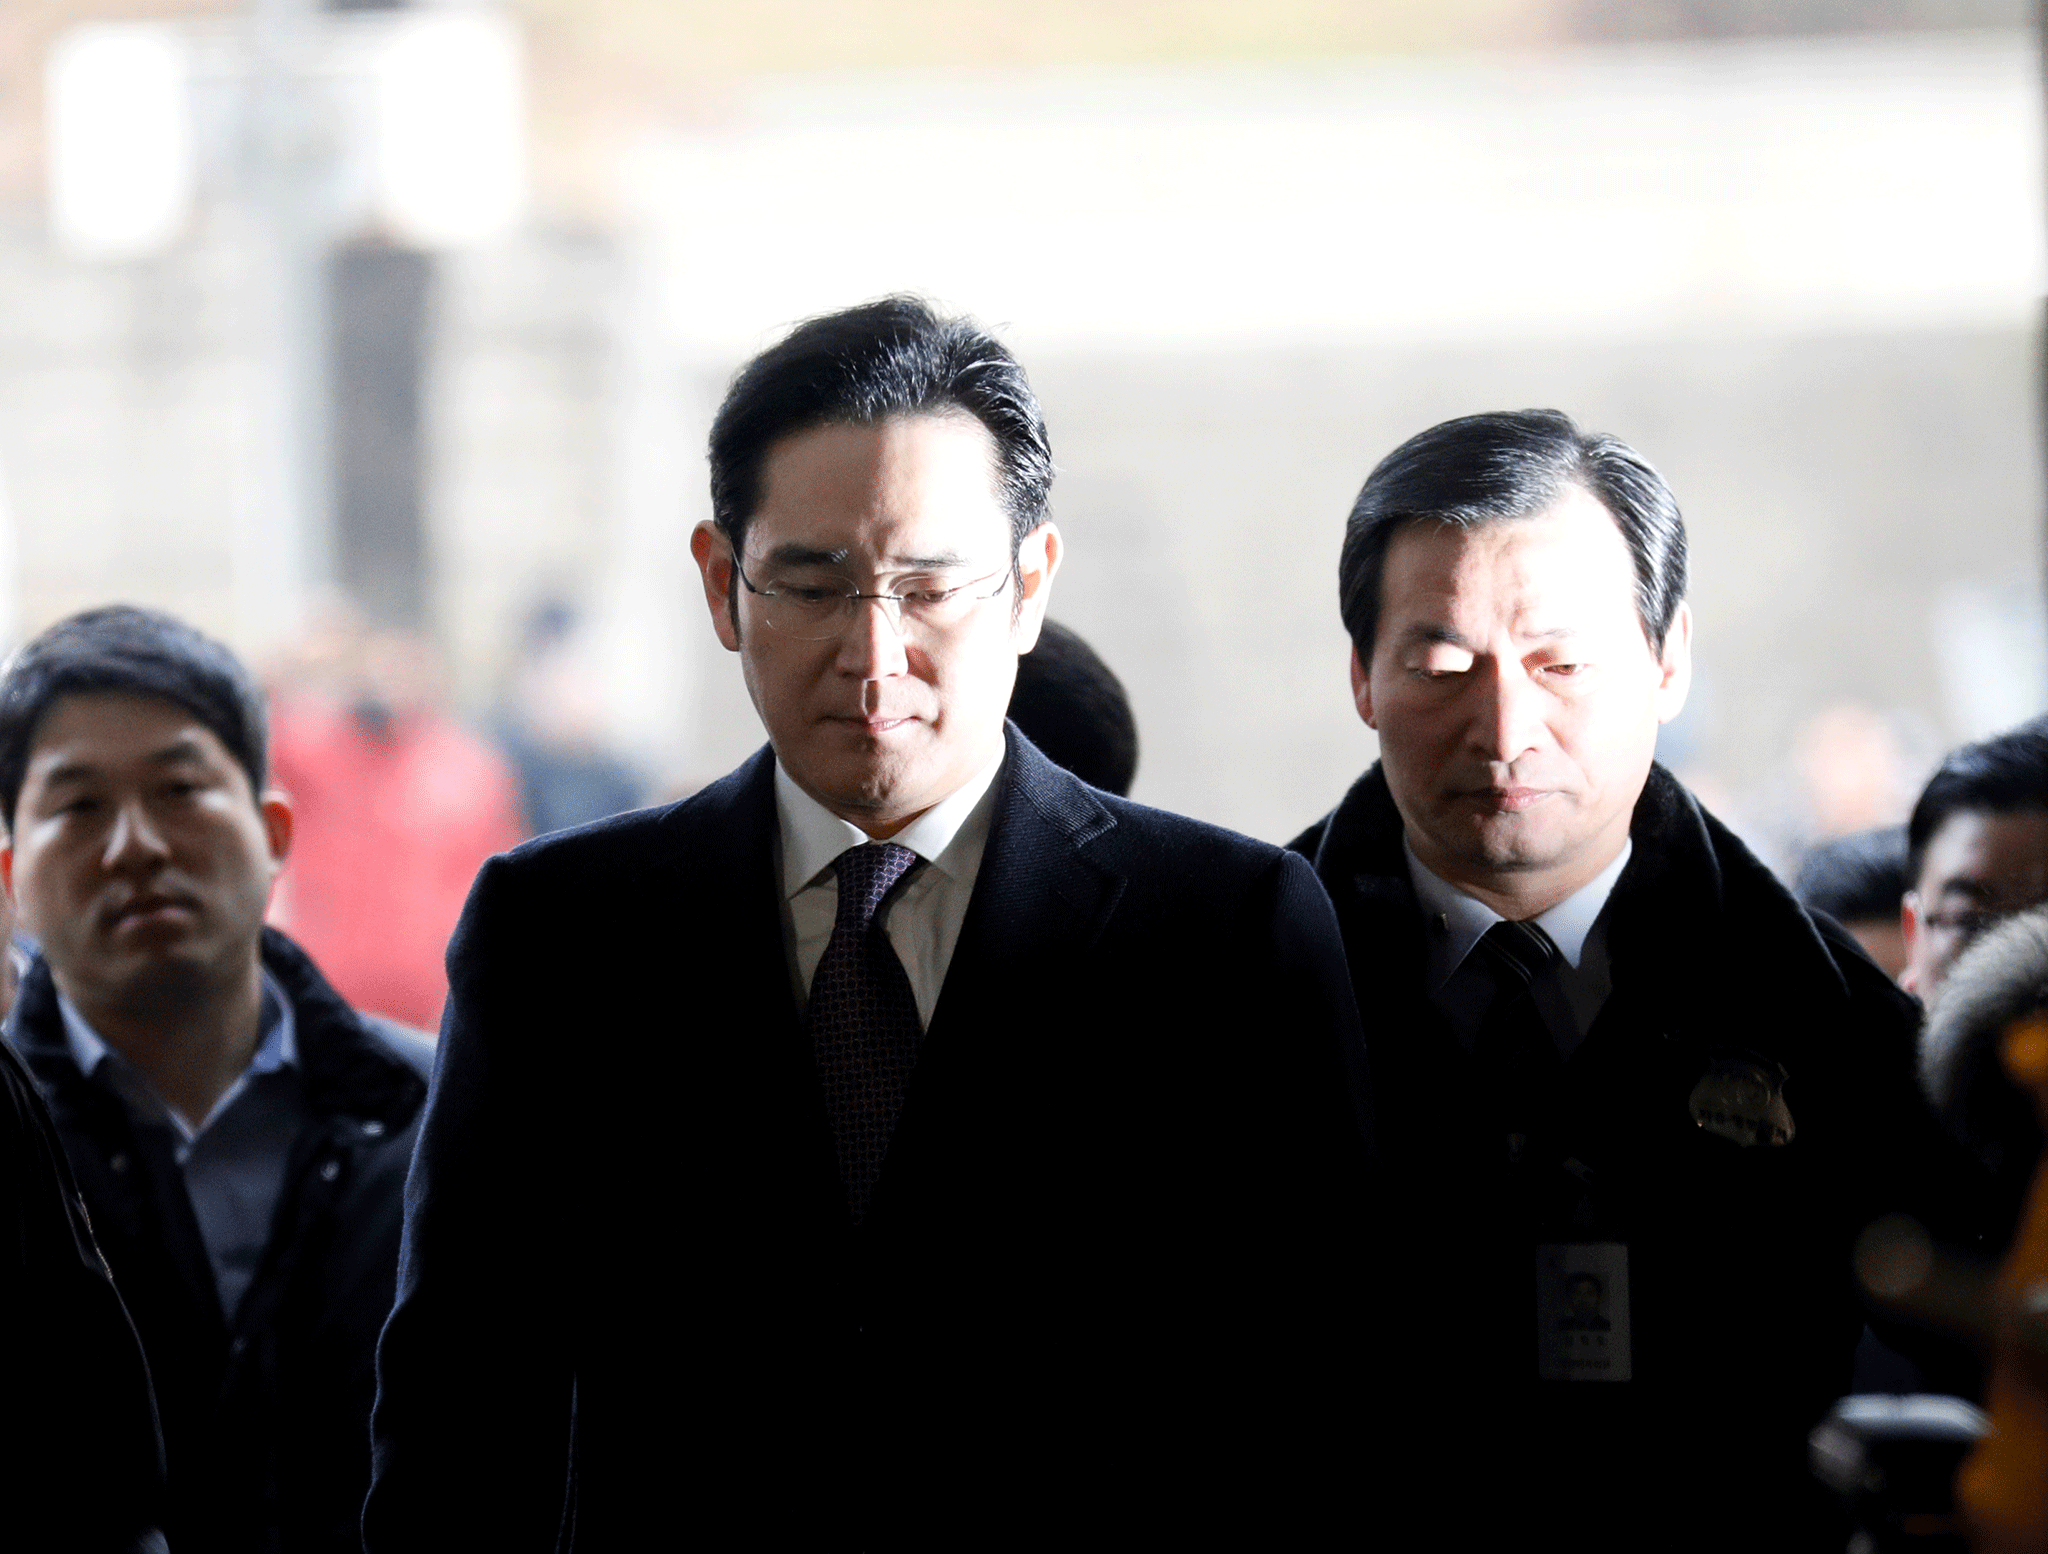 Investigators are looking into whether the vice chairman, Lee, was involved in providing as much as 43bn won (£30.4m) to benefit a close friend of South Korean President Park Geun-hye